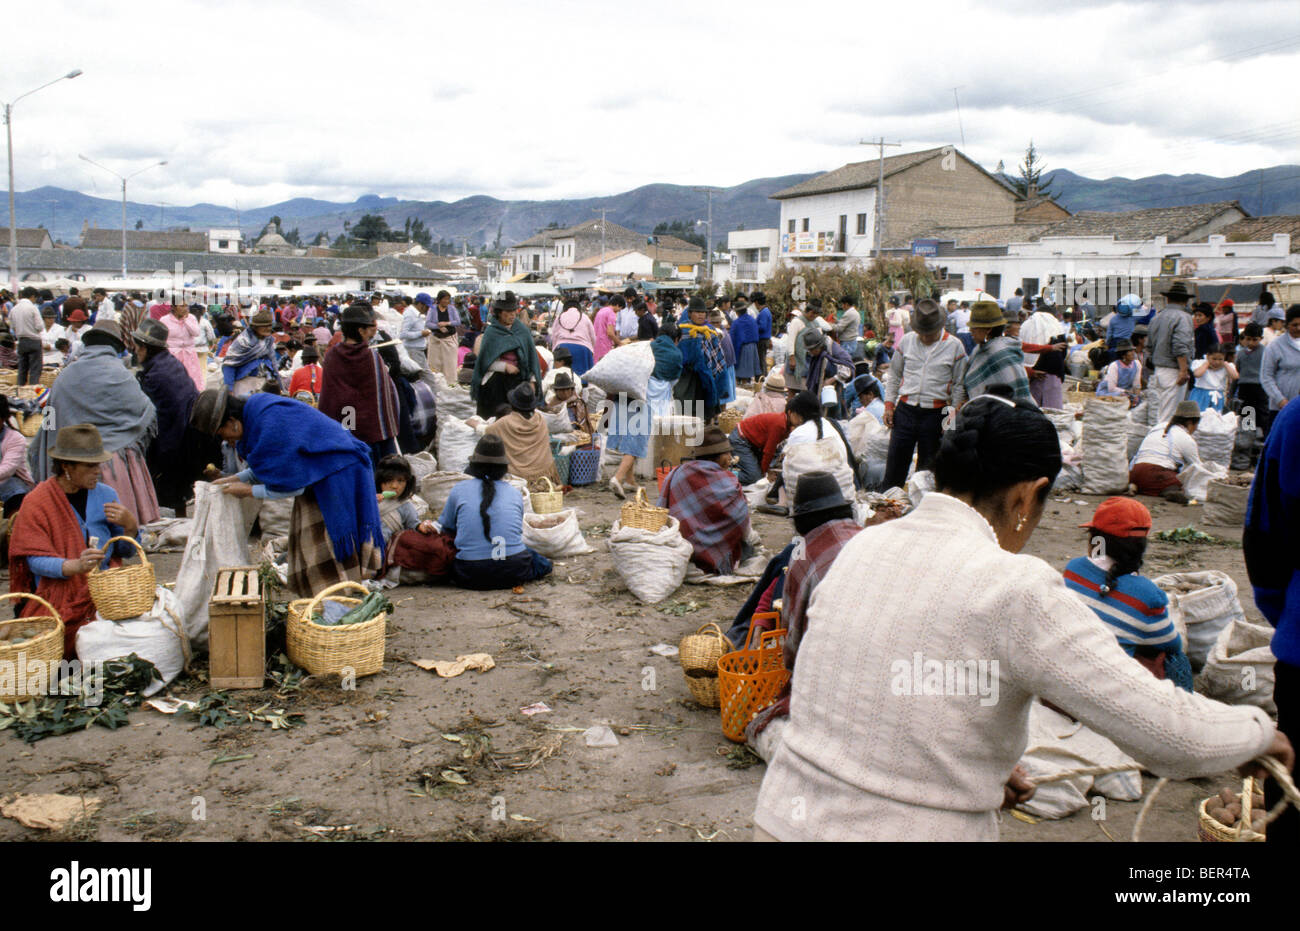 View across mass of bodies in open market square Ecuadorian Highlands. Stock Photo